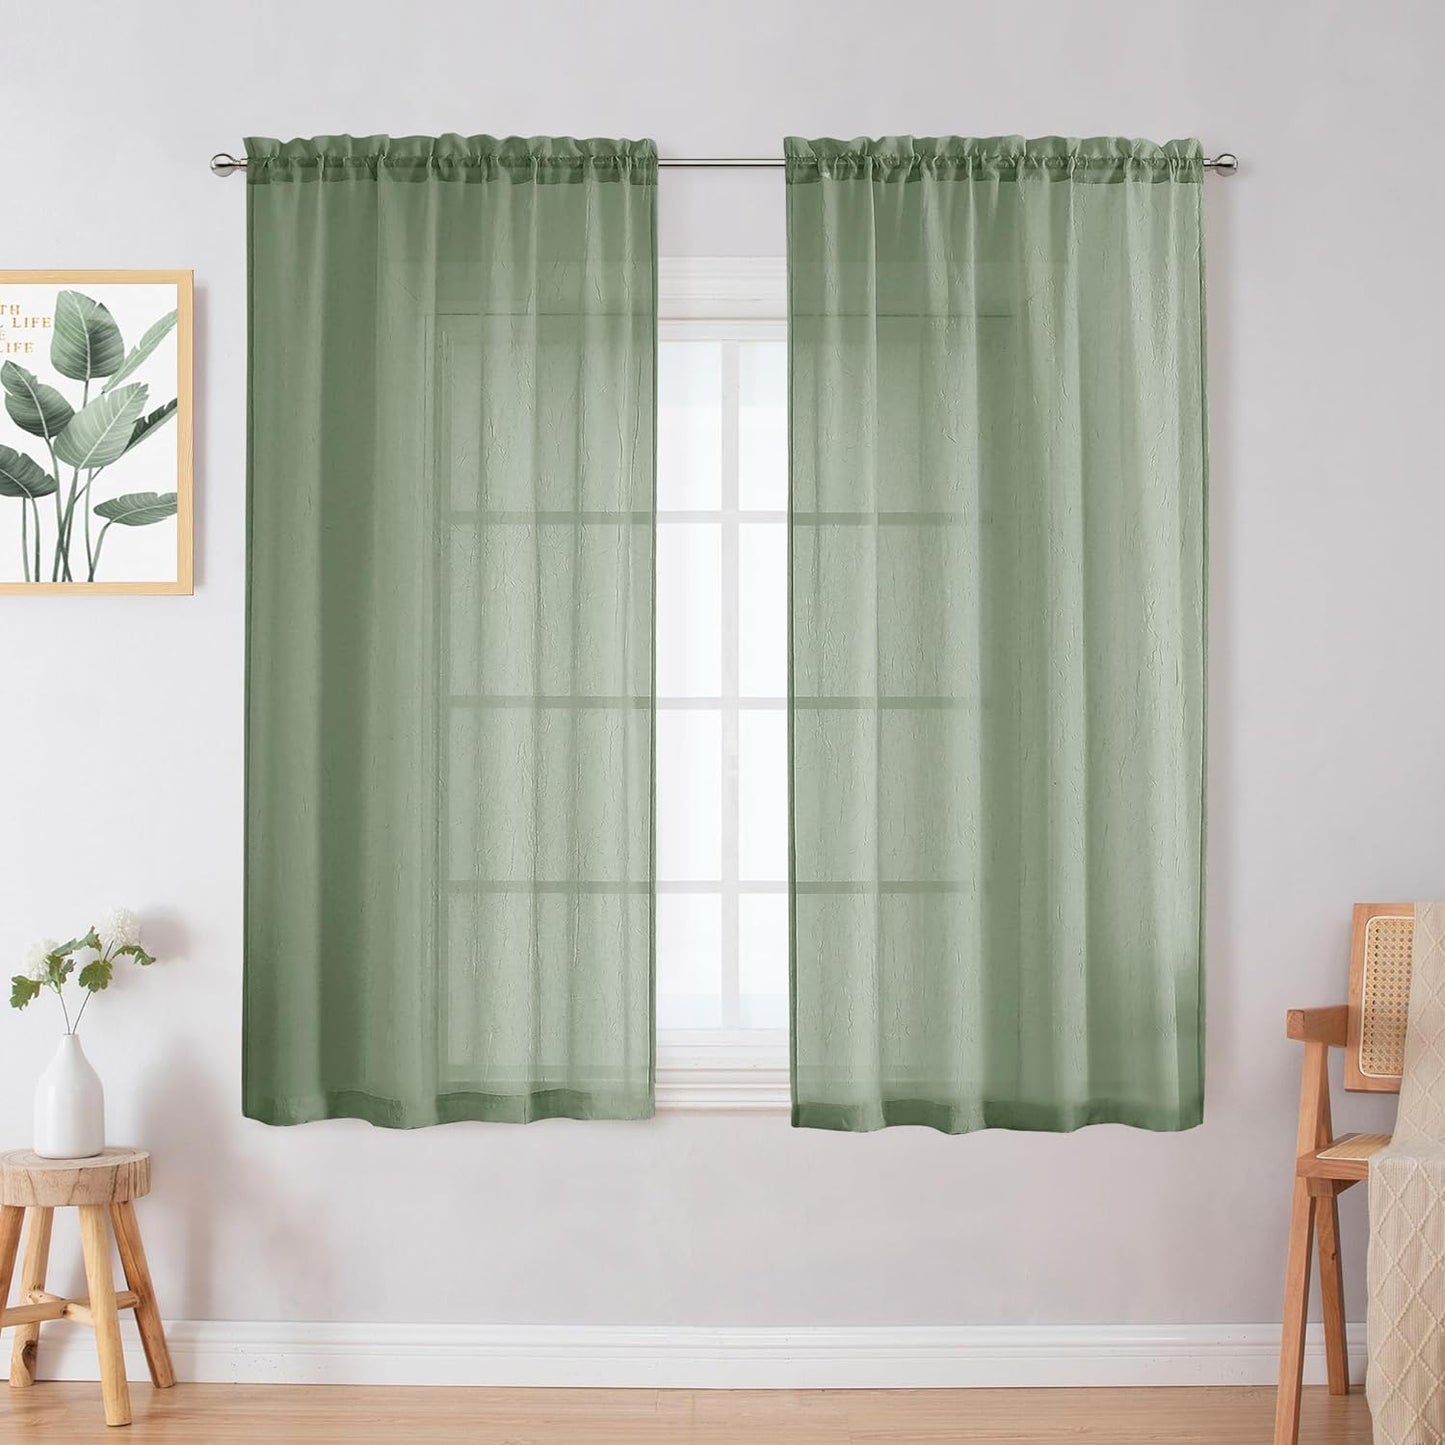 Crushed Sheer White Curtains 63 Inch Length 2 Panels, Light Filtering Solid Crinkle Voile Short Sheer Curtian for Bedroom Living Room, Each 42Wx63L Inches  Chyhomenyc Sage Green 28 W X 45 L 